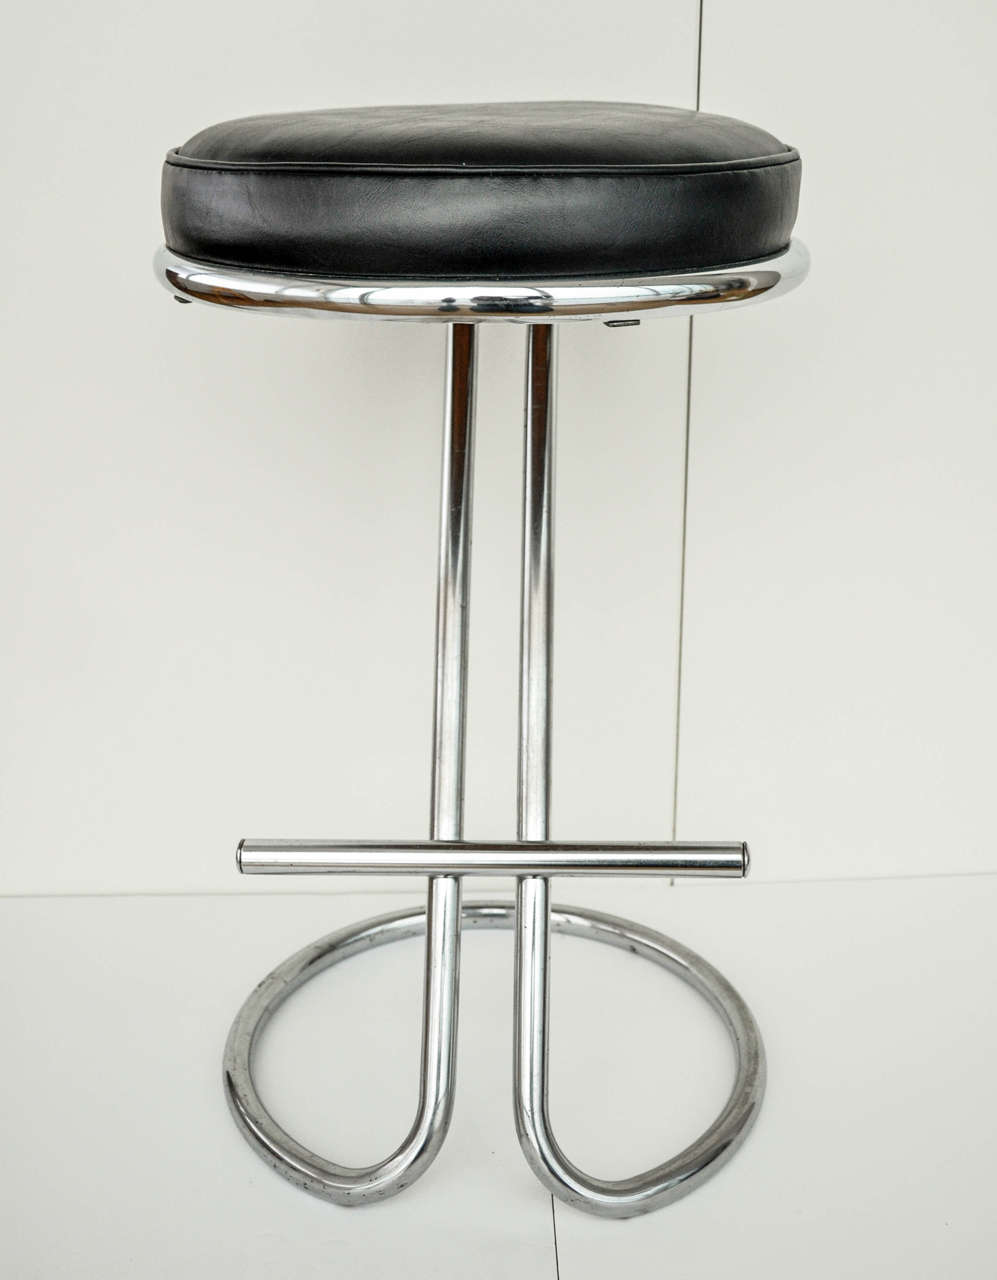 An iconic, counter or bar stool of chrome-plated tubular steel by Industrial designer Gilbert Rohde for Troy Sunshade. Rohde (1894-1944) was an early advocate for American Modernism. Both functional and flexible, his 